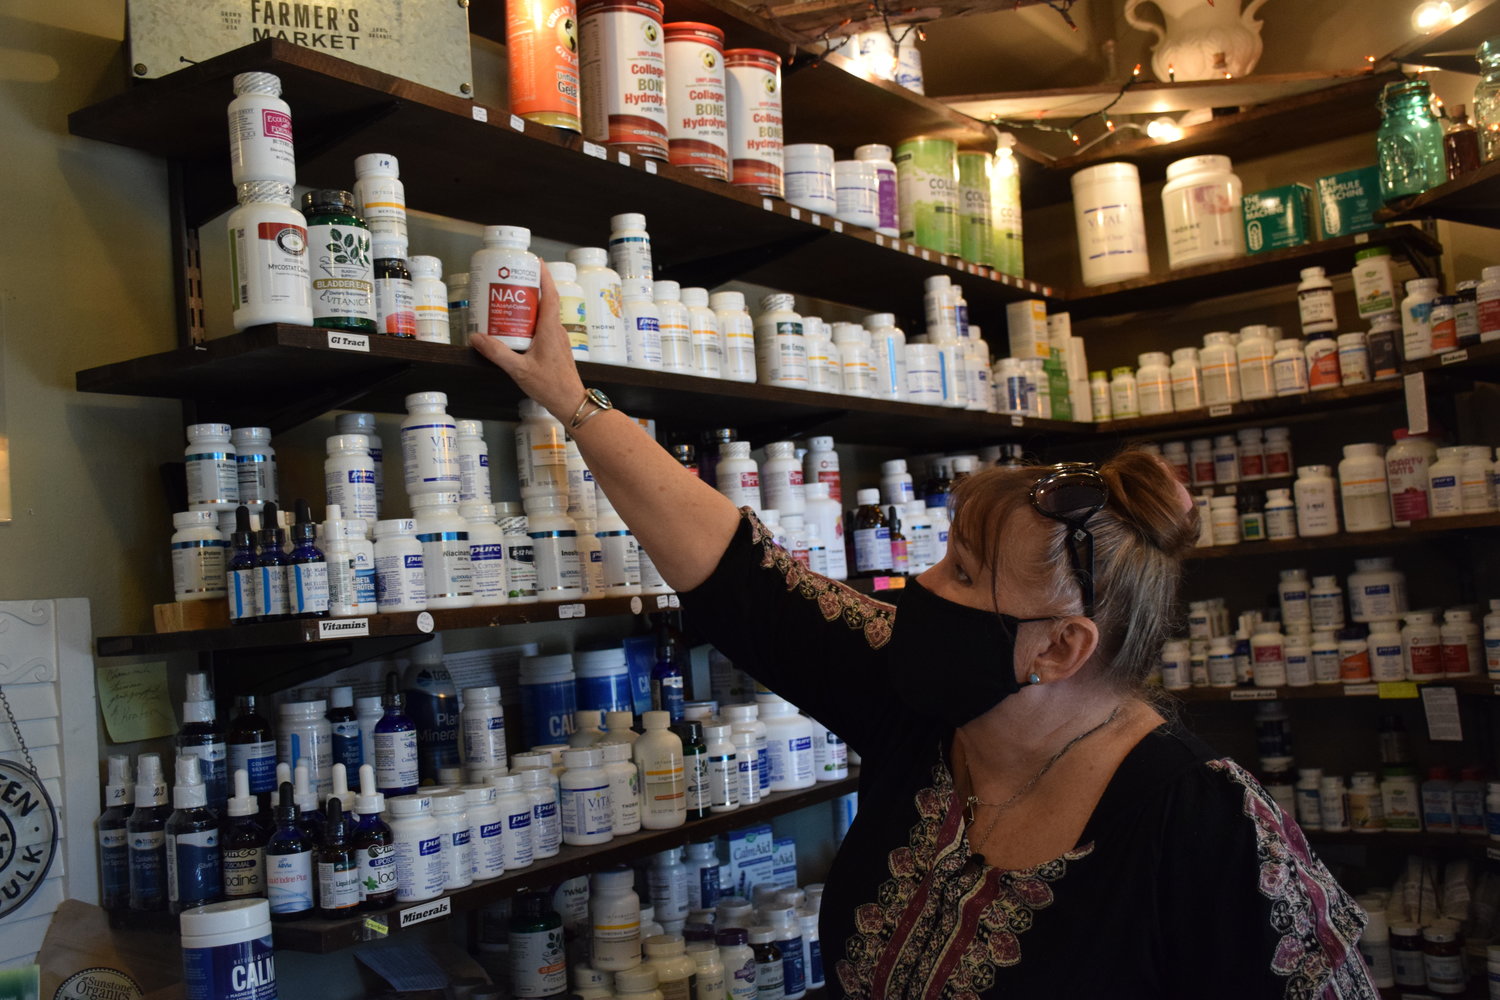 Battle Ground Apothecary owner Diana Davidson points out popular supplements her business sells on Sept. 15.